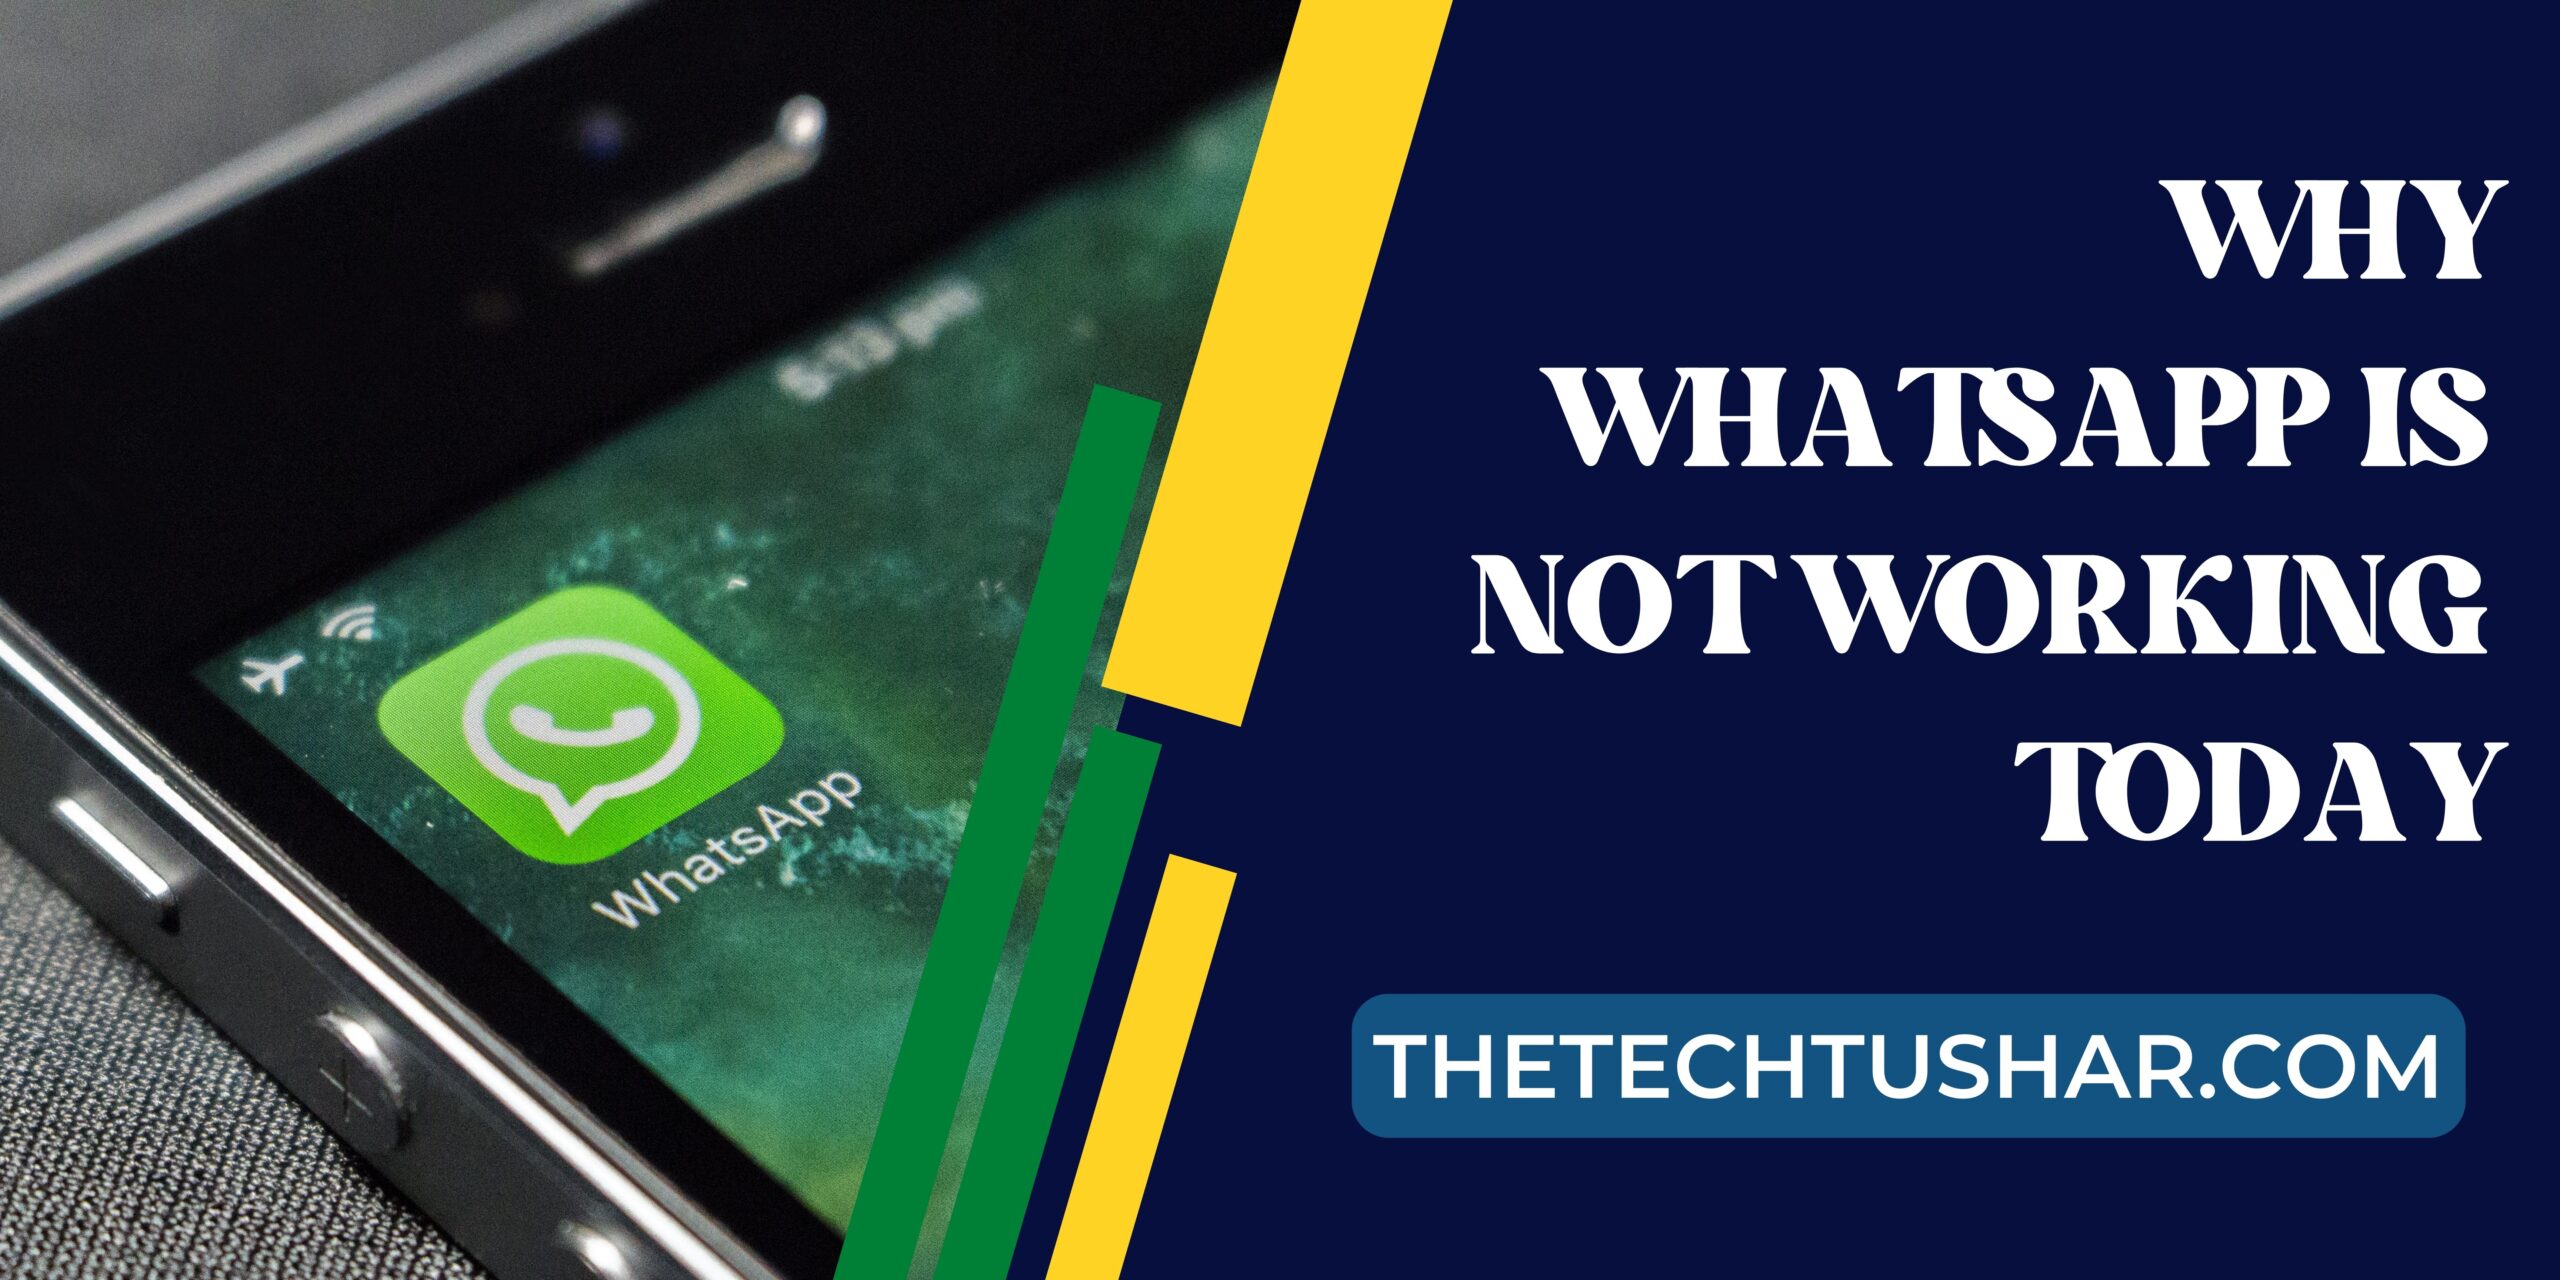 Why Whatsapp Is Not Working Today|Why Whatsapp Is Not Working Today|Tushar|Thetechtushar